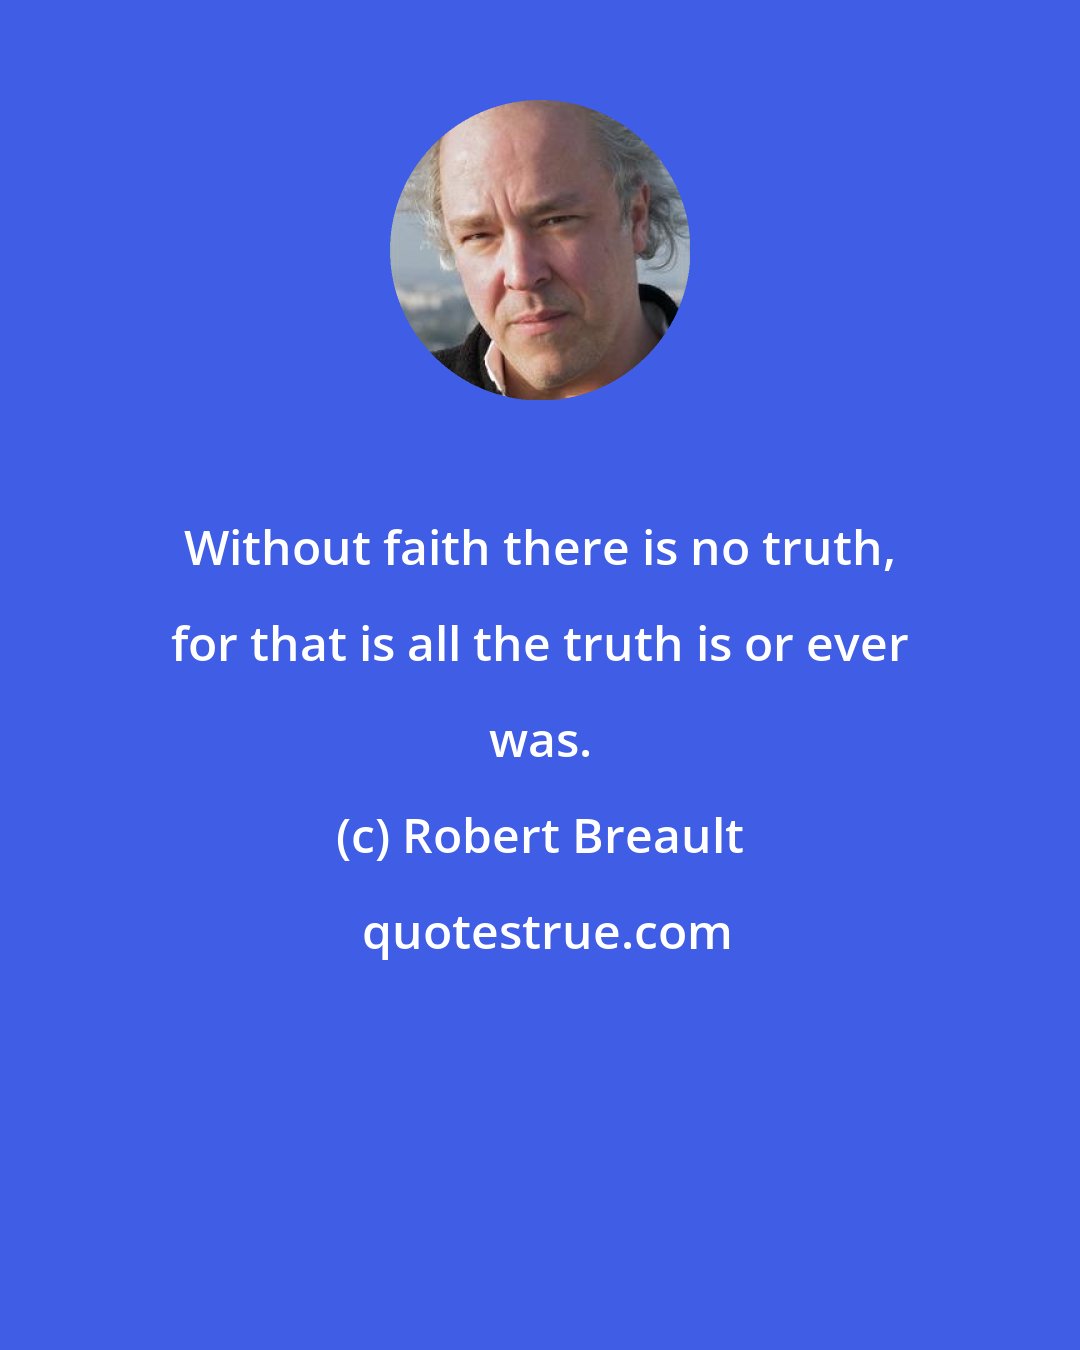 Robert Breault: Without faith there is no truth, for that is all the truth is or ever was.